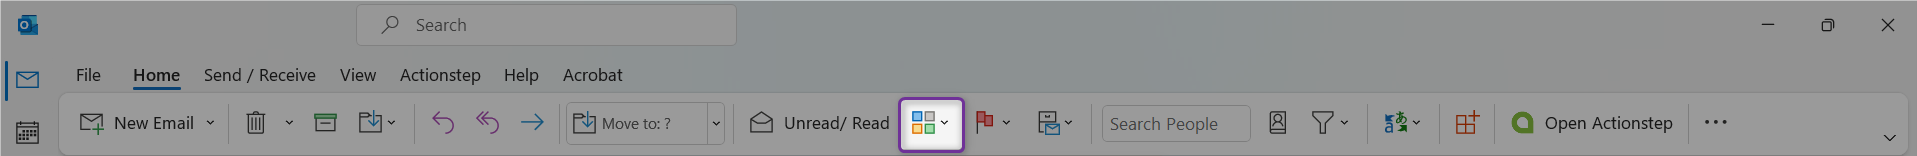 Microsoft Outlook ribbon with the 'Categorize' button highlighted